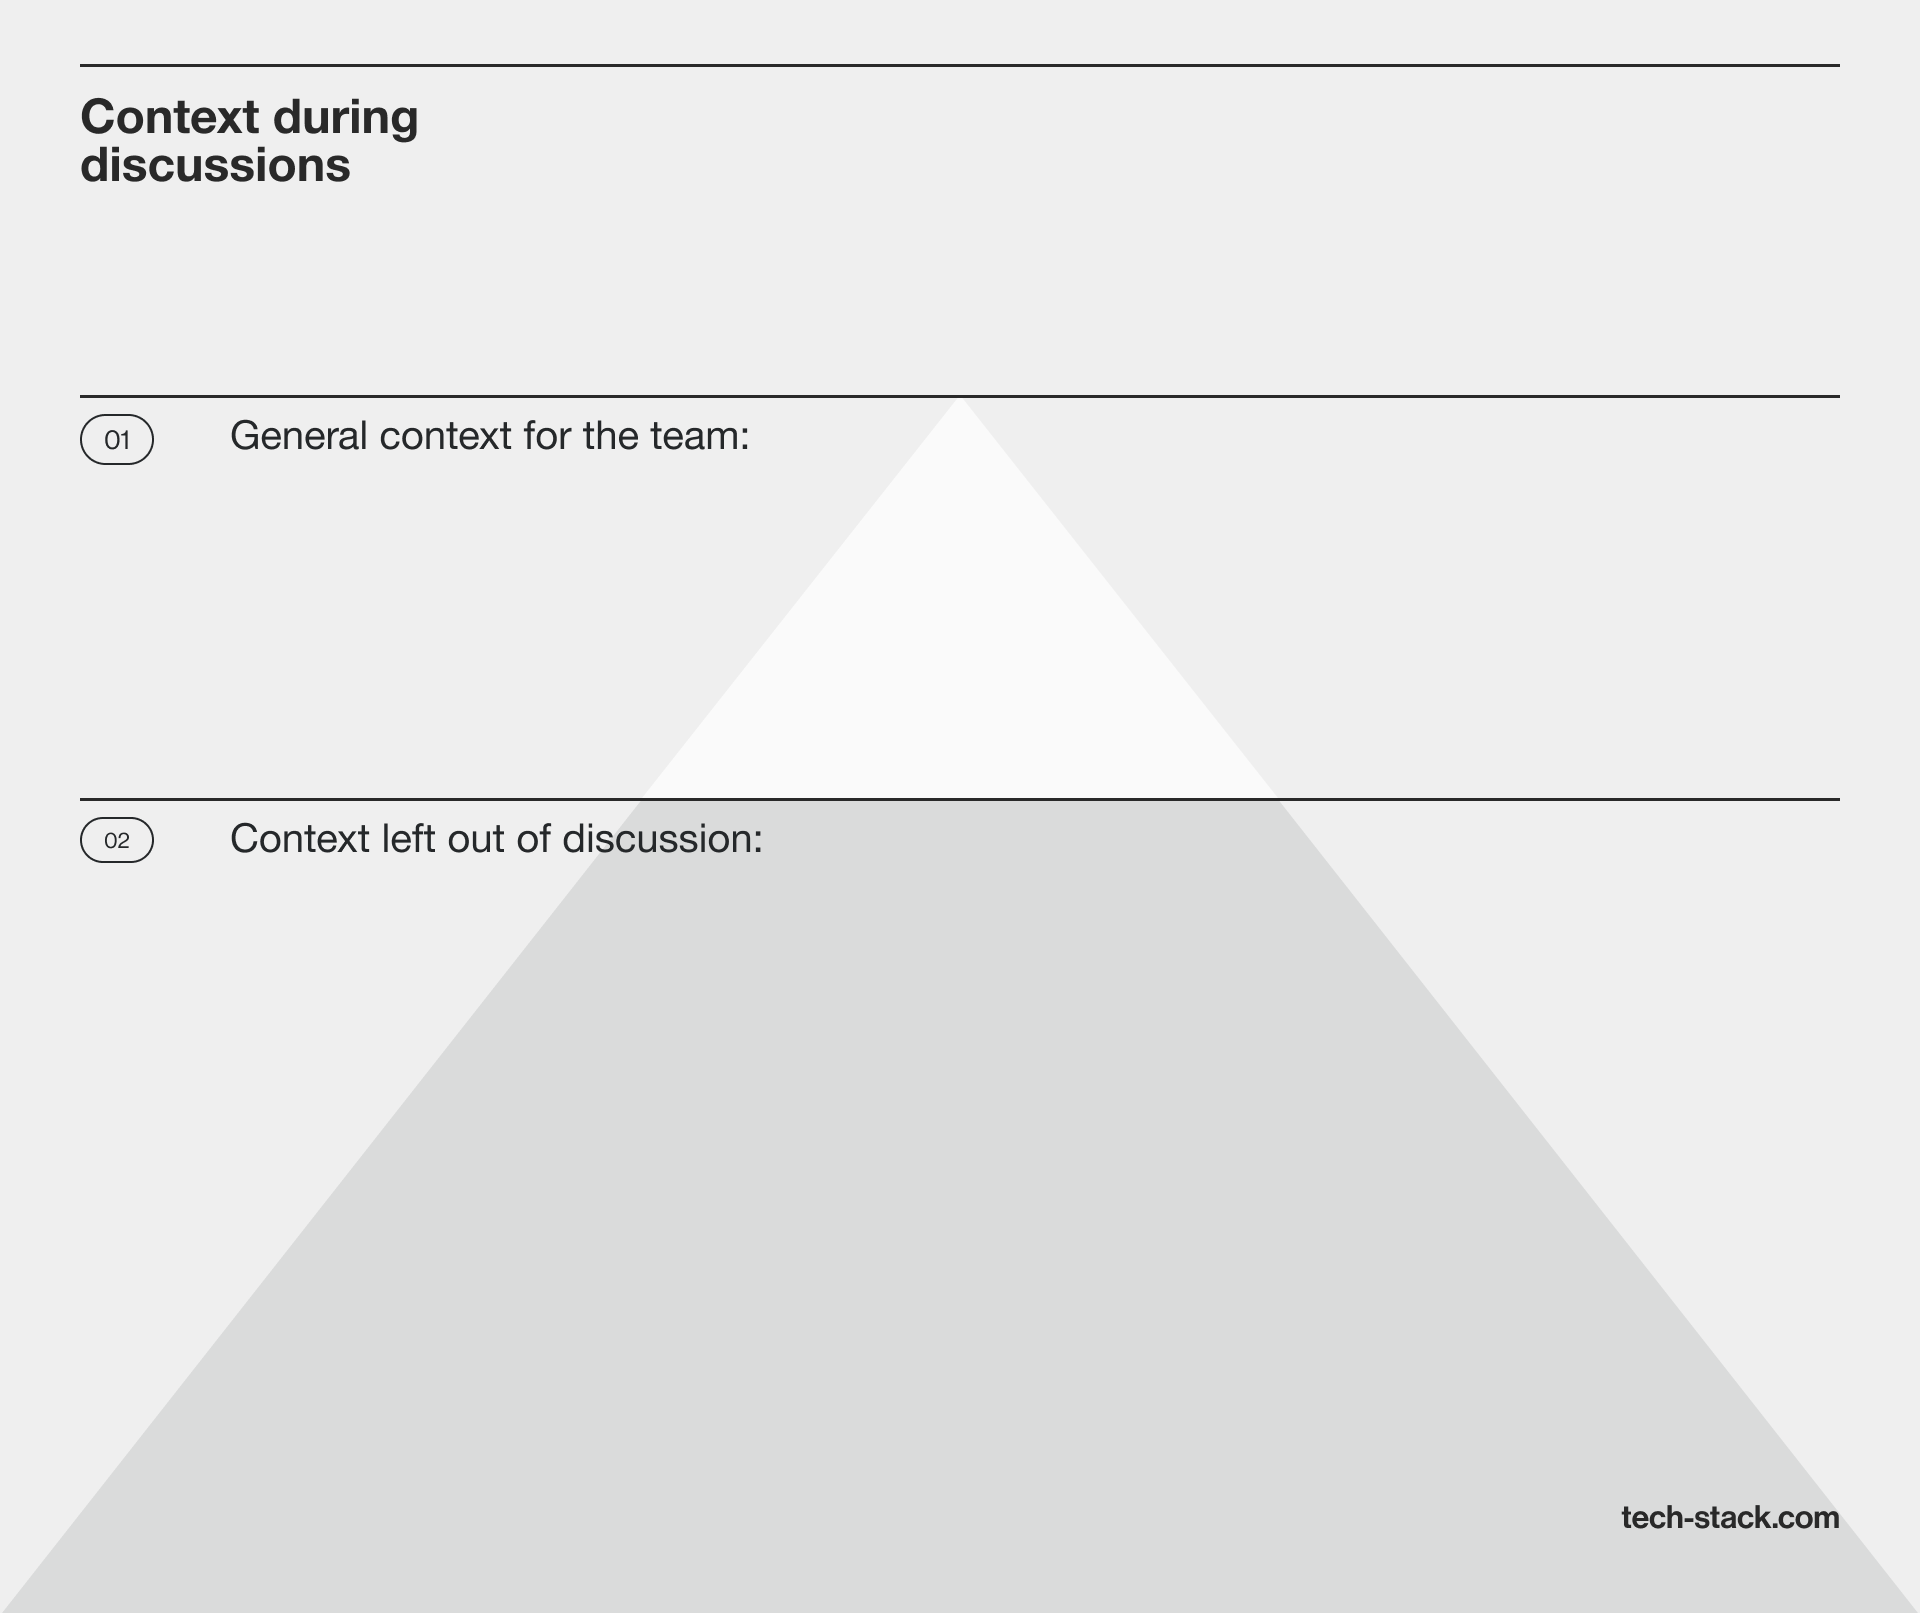 An iceberg comparison helps to show how much of a context slips the teams’ attention